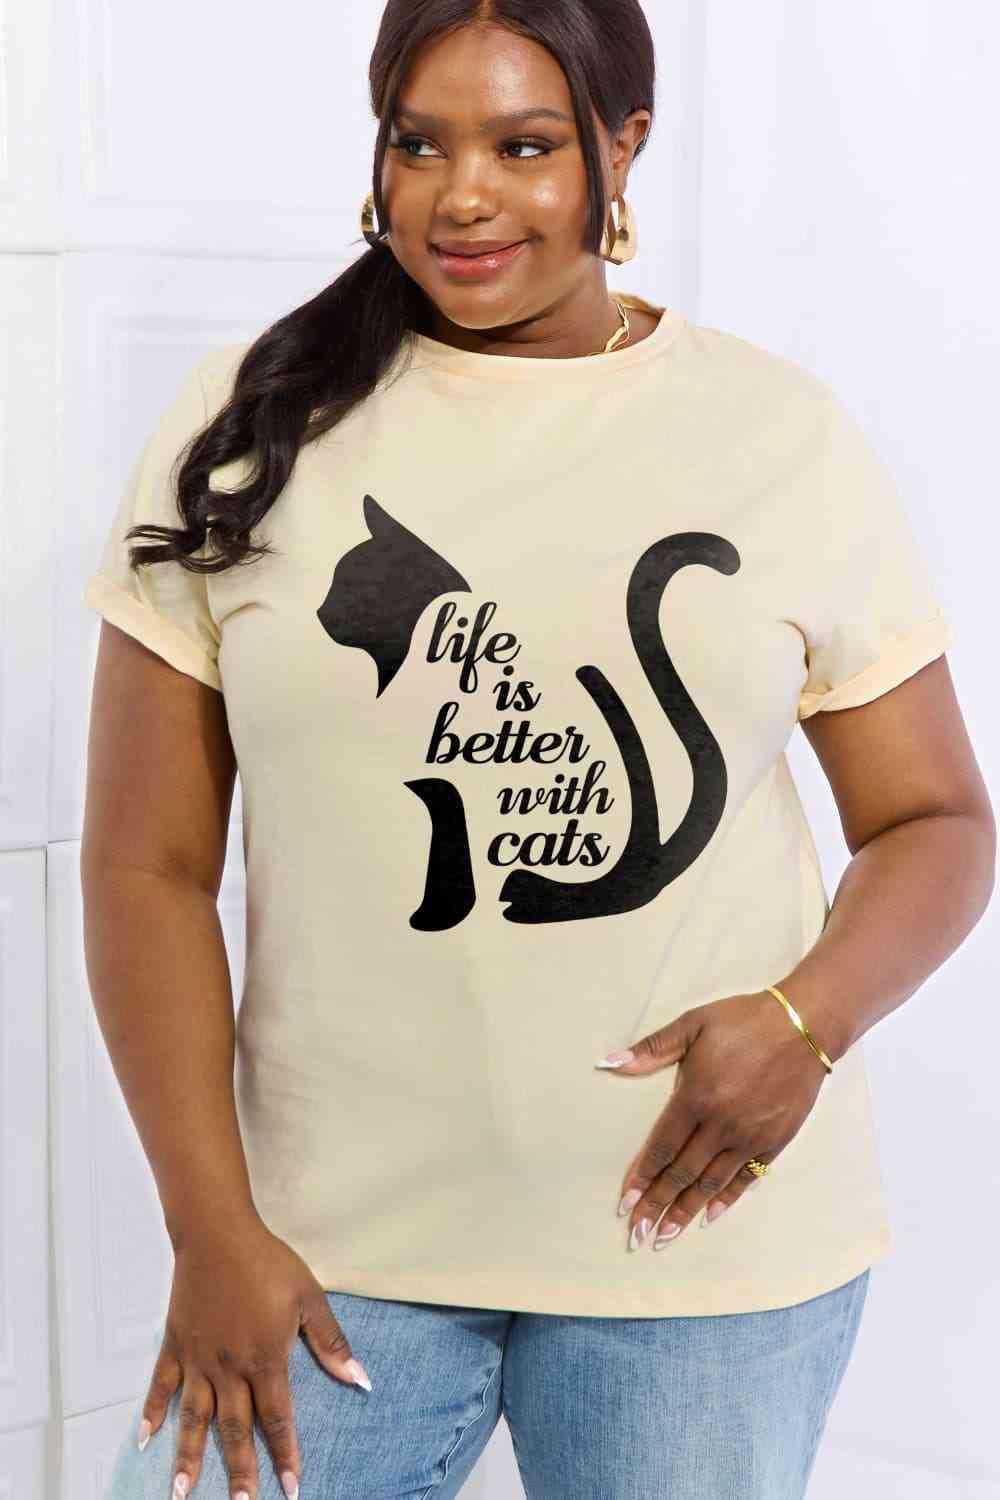 LIFE IS BETTER WITH CATS Graphic Cotton Tee - T-Shirts - Shirts & Tops - 3 - 2024